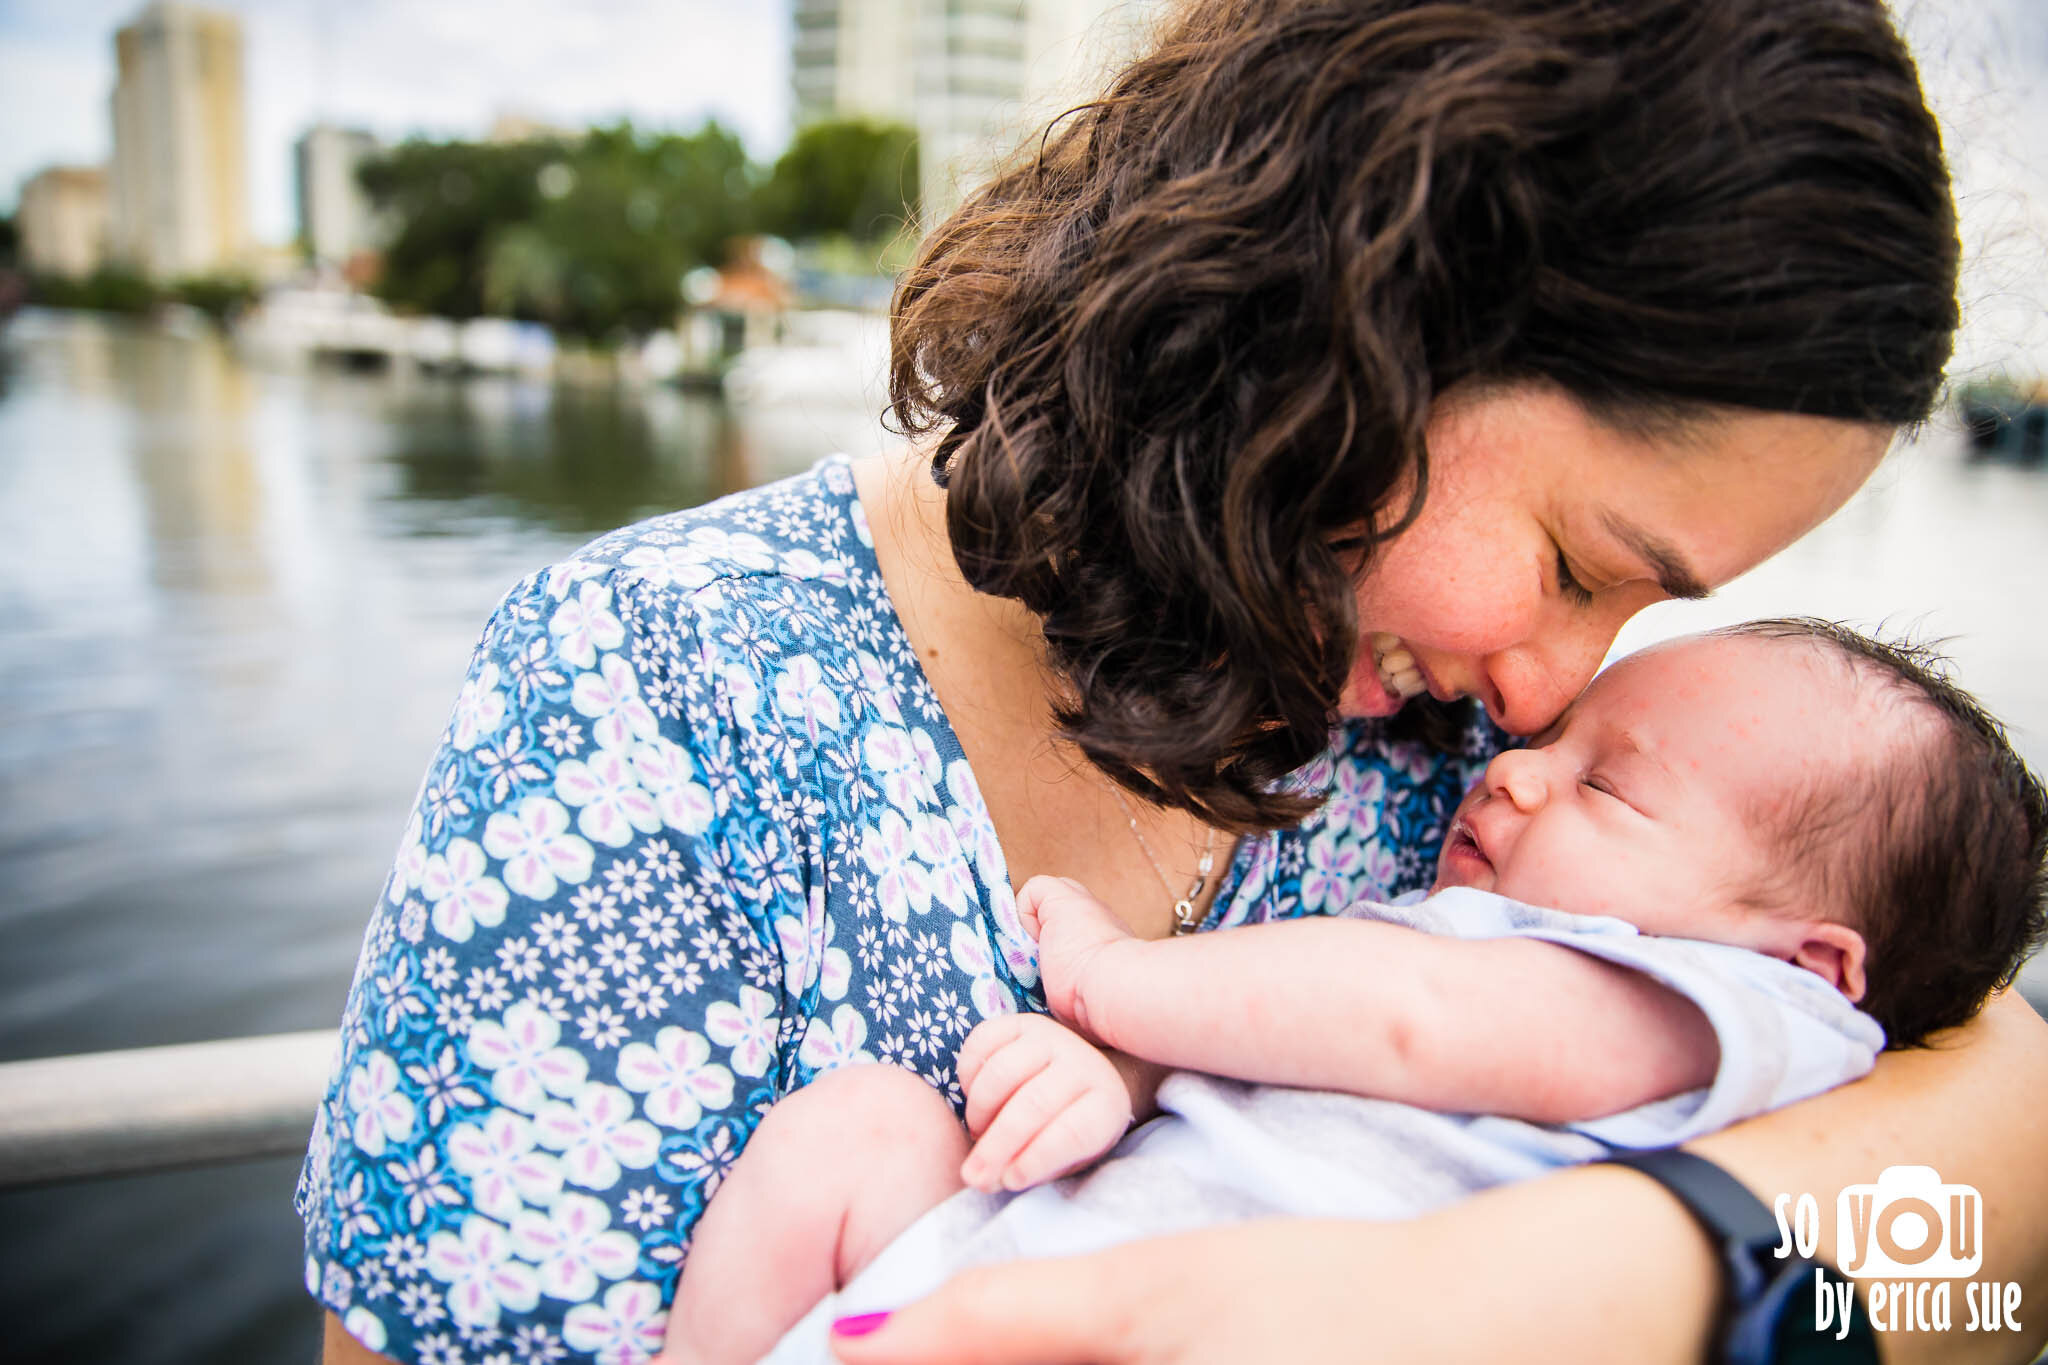 11-so-you-by-erica-sue-riverwalk-ft-lauderdale-extended-family-newborn-photographer-CD8A7095.jpg